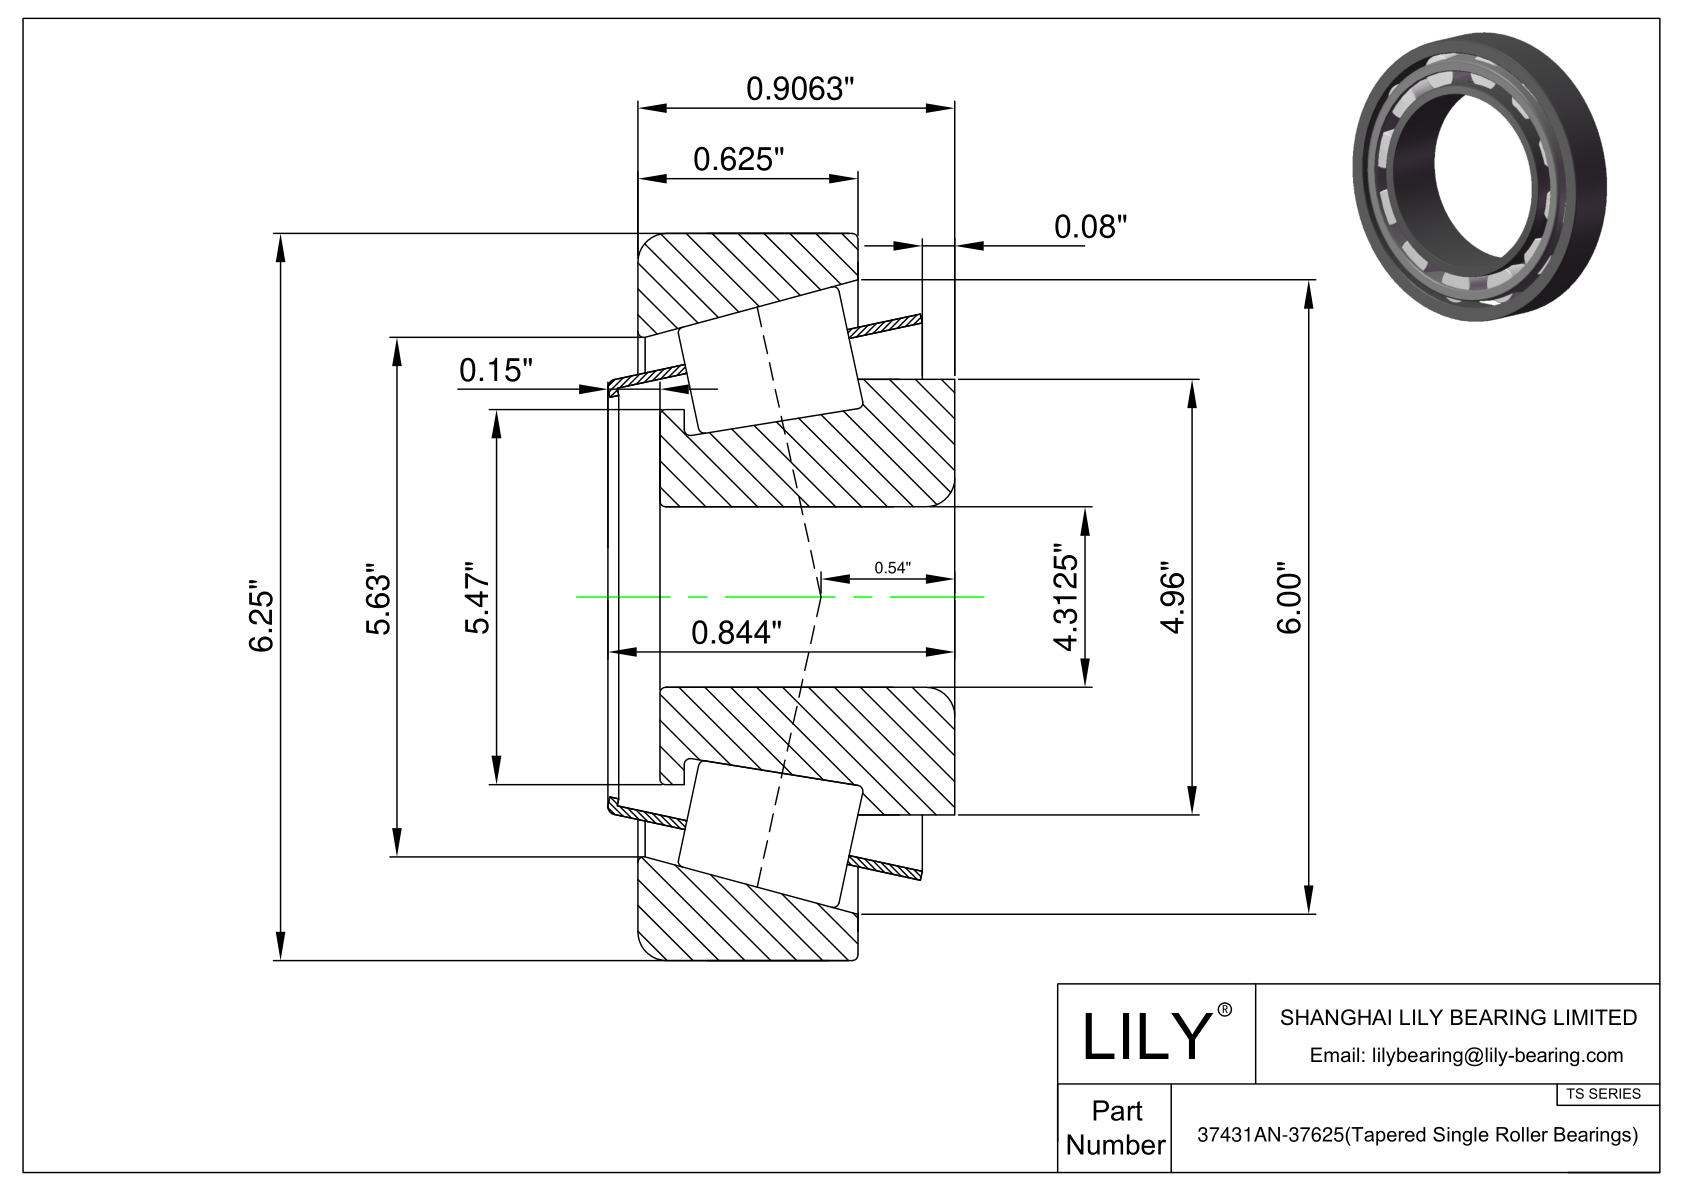 37431AN-37625 TS (Tapered Single Roller Bearings) (Imperial) cad drawing